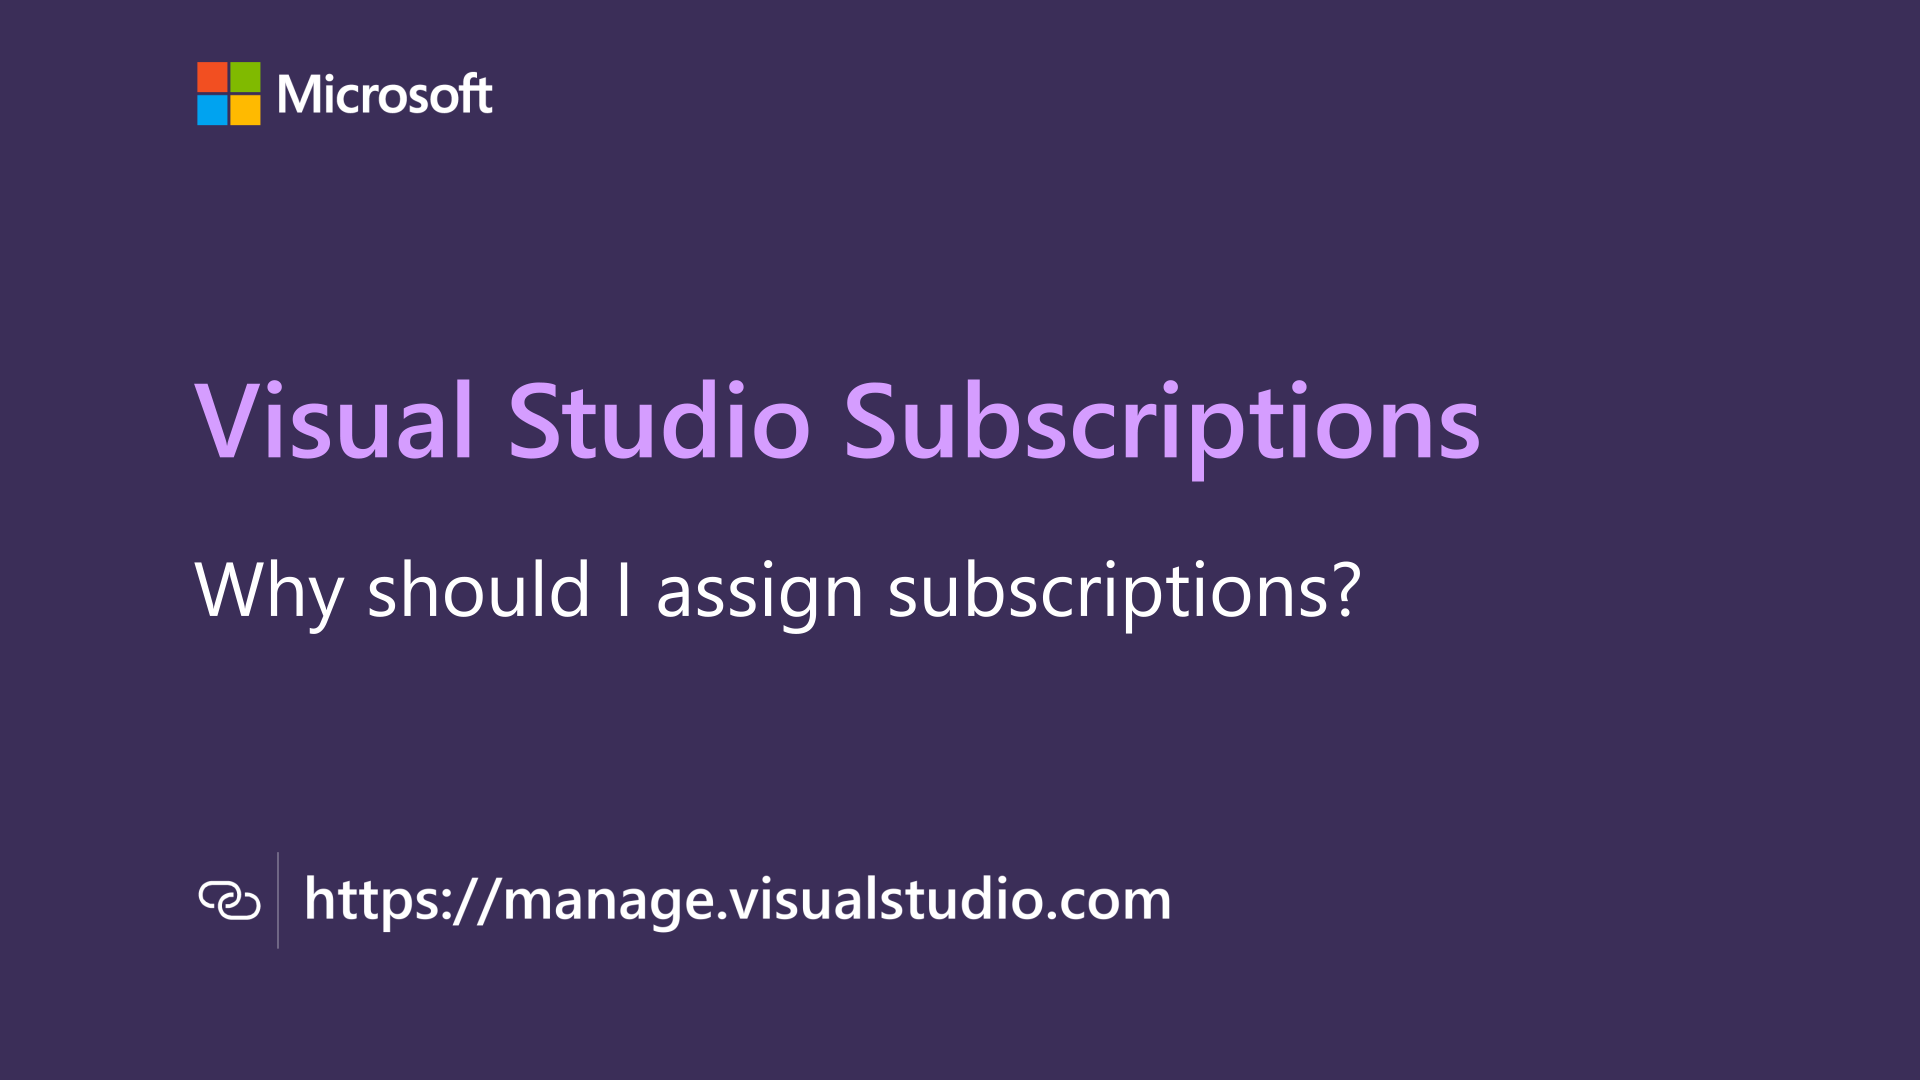 Thumbnail for Why should I assign Visual Studio subscriptions? video